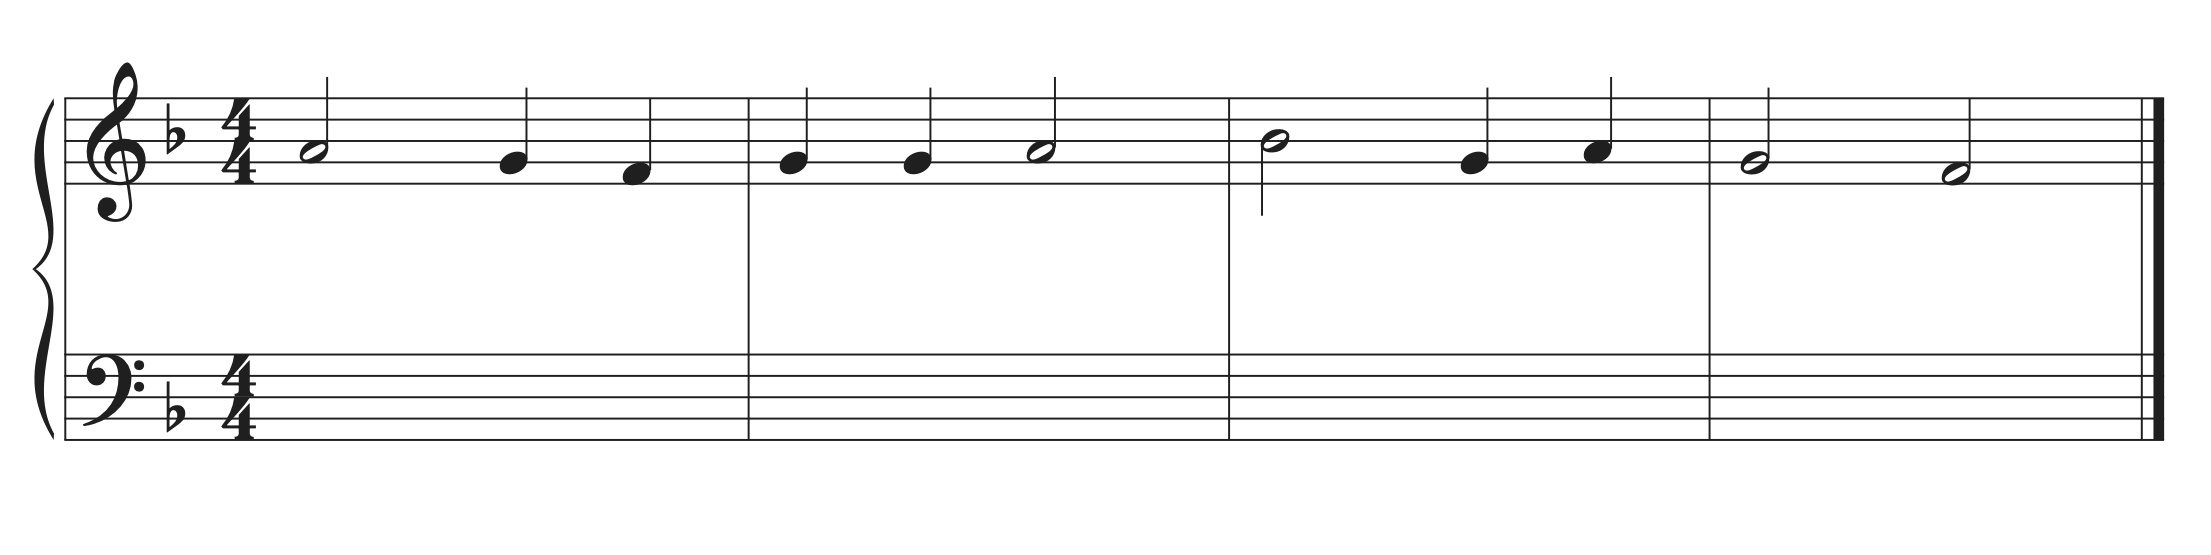 A four bar musical example in F major with notes A4, G4, F4, G4, G4, A4, B-flat 4, G4, A4, G4, F4.